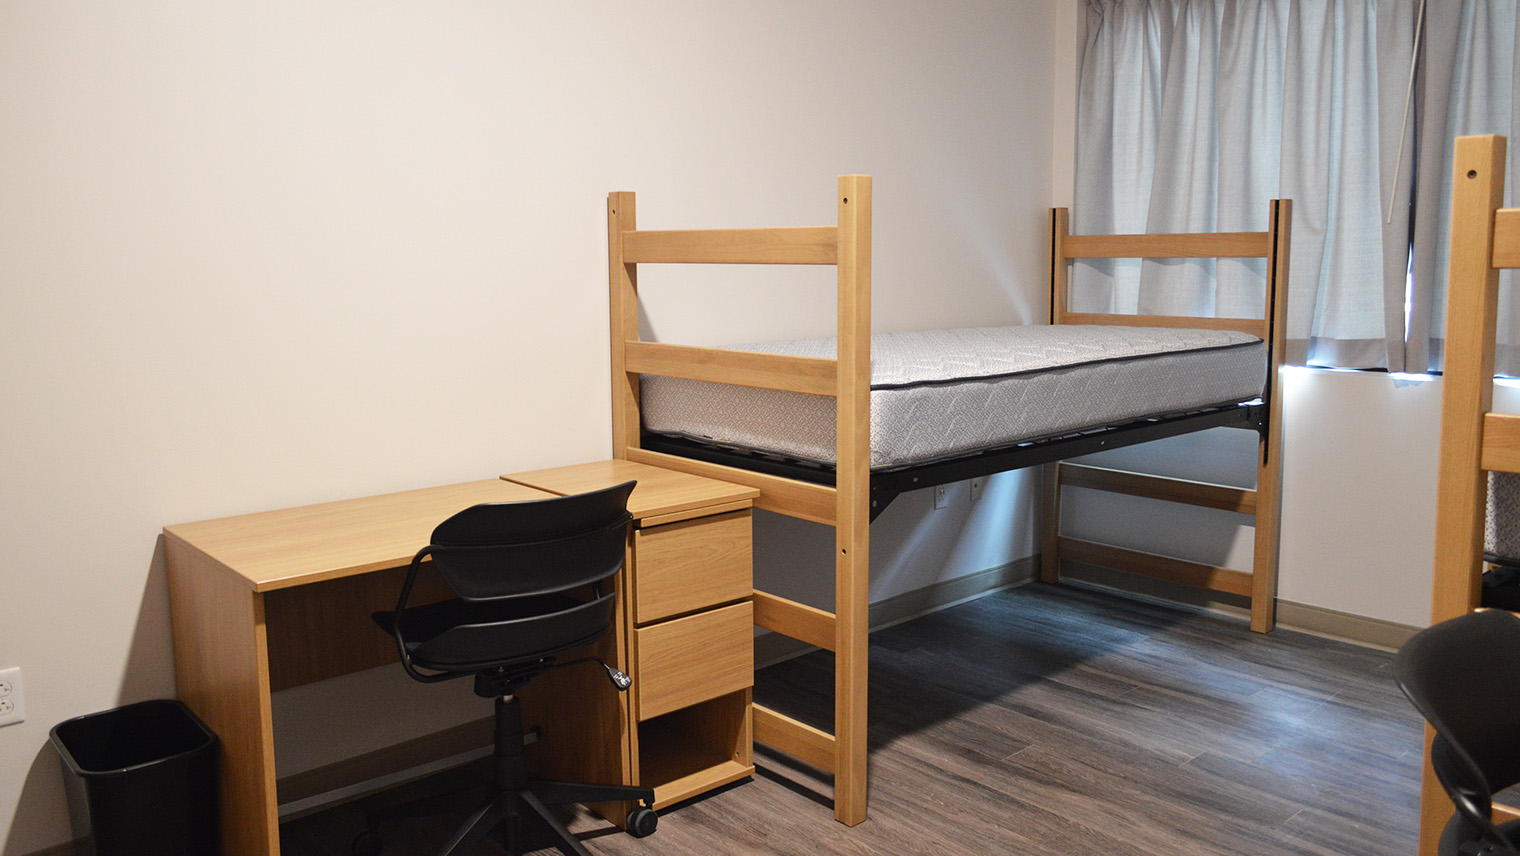 Heitz House student room with beds with adjustable height desks and chairs